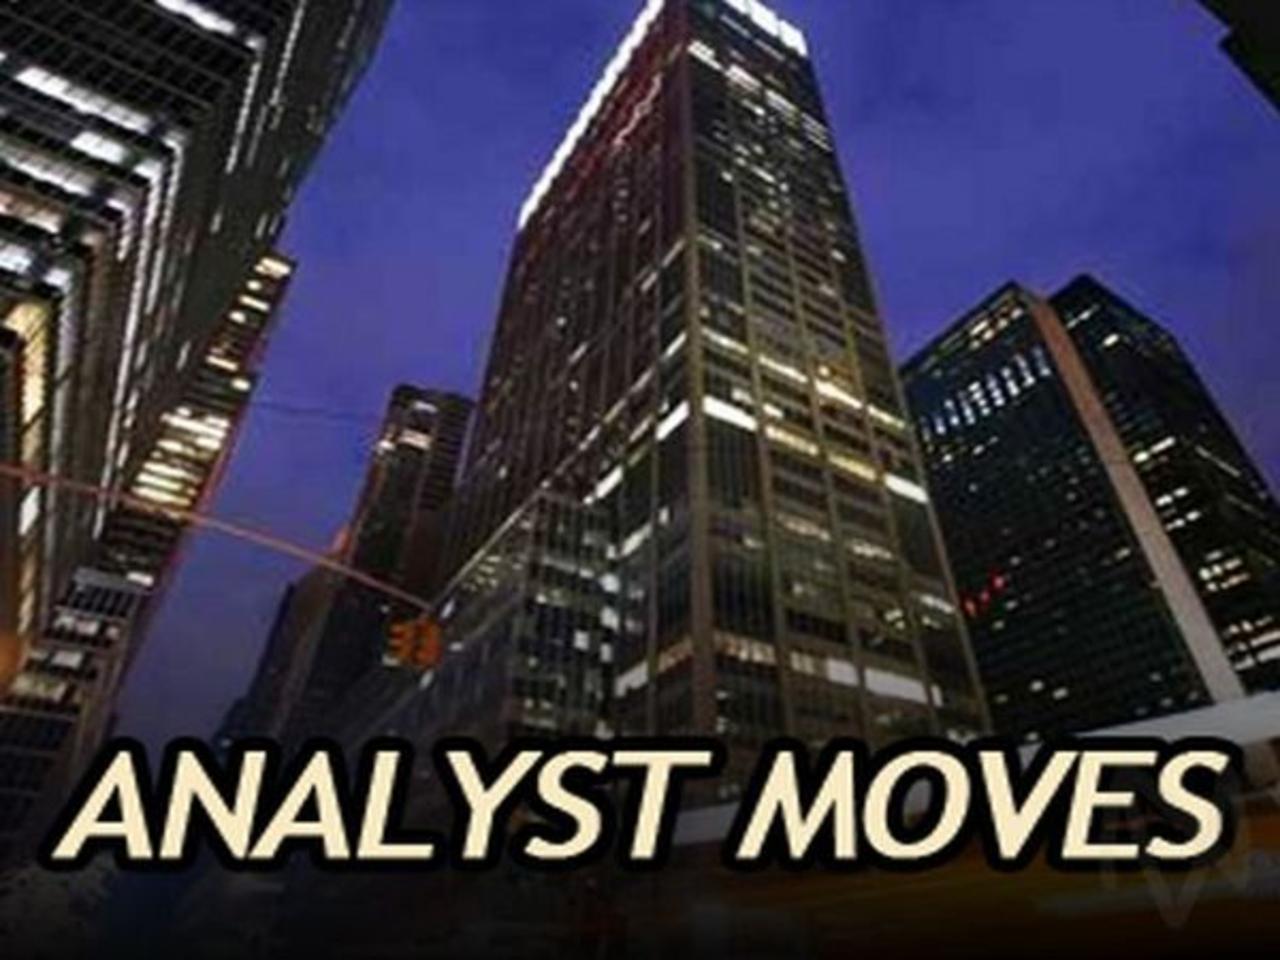 Dow Analyst Moves: CRM